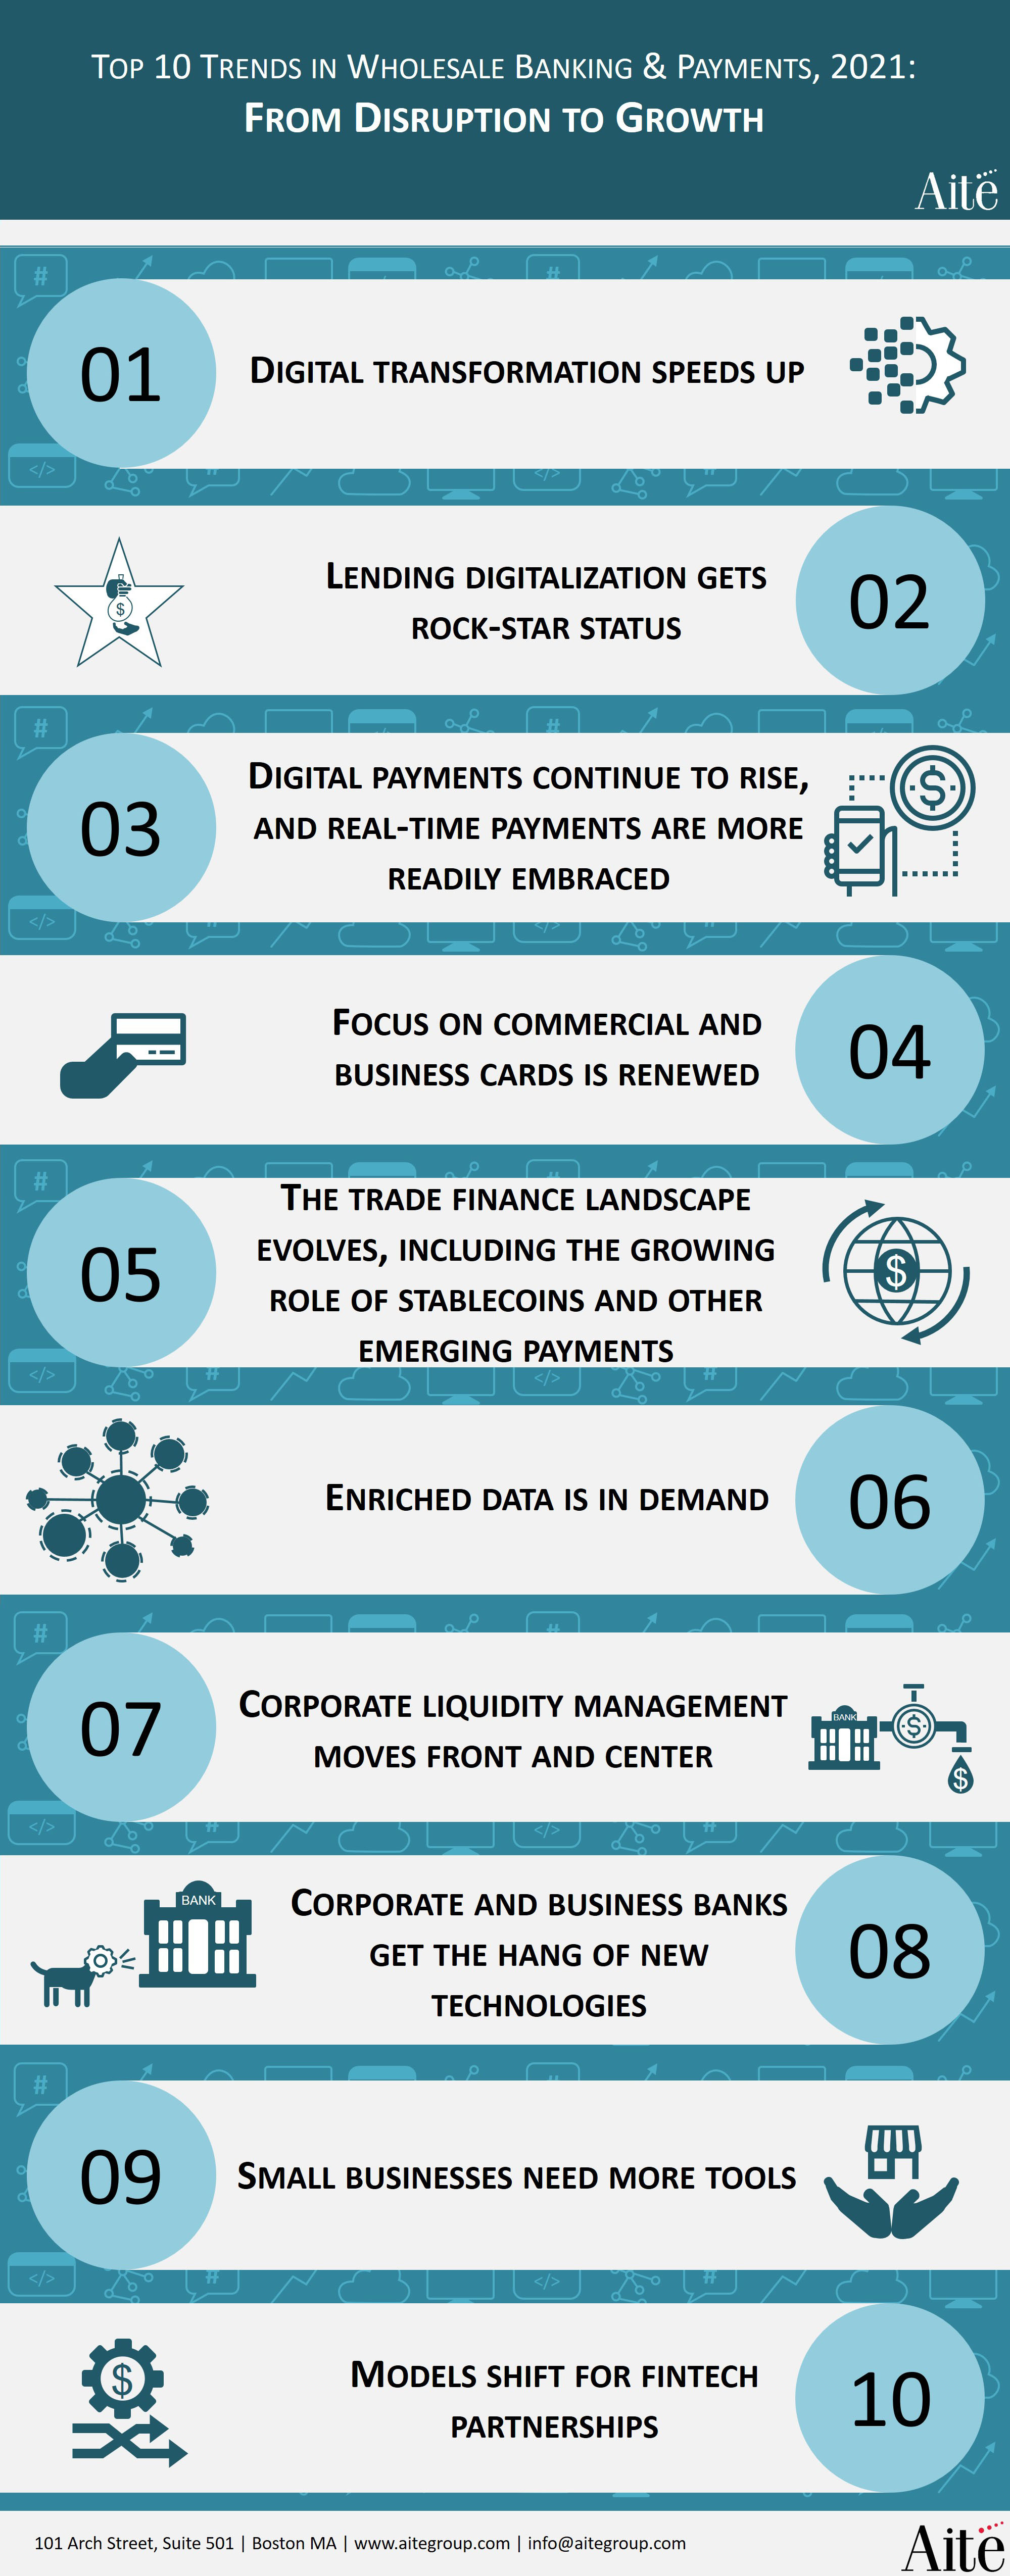 Top 10 Trends in Wholesale Banking & Payments, 2021: From Disruption to Growth |